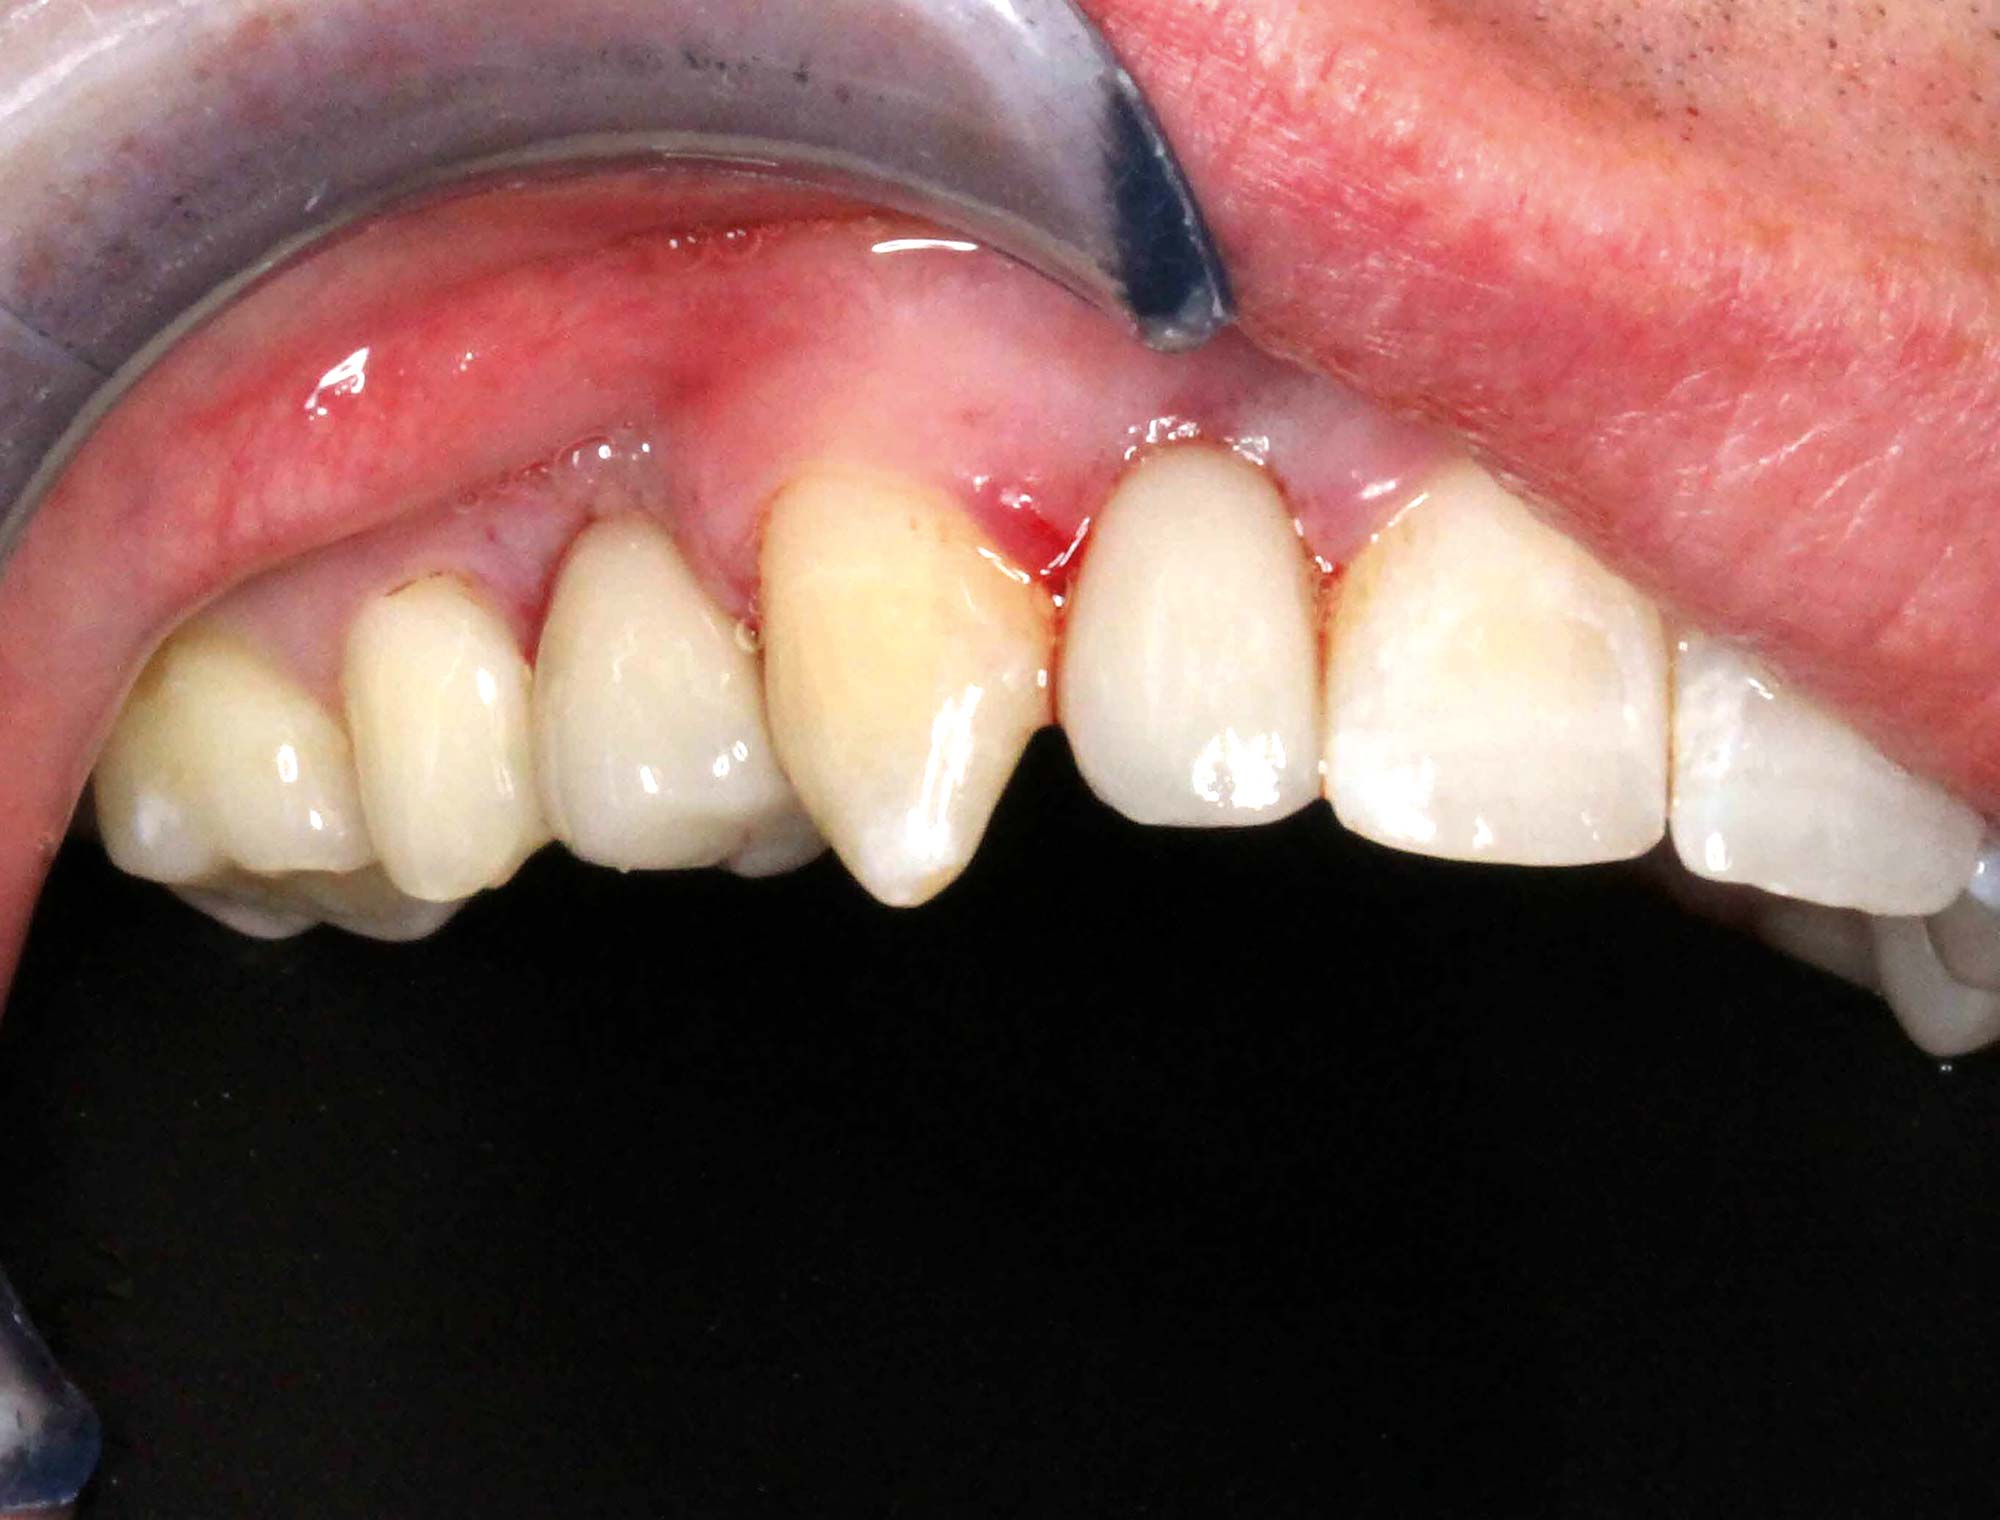 https://dentistry.co.uk/wp-content/uploads/2020/01/Figure-9-implant-placement.jpg